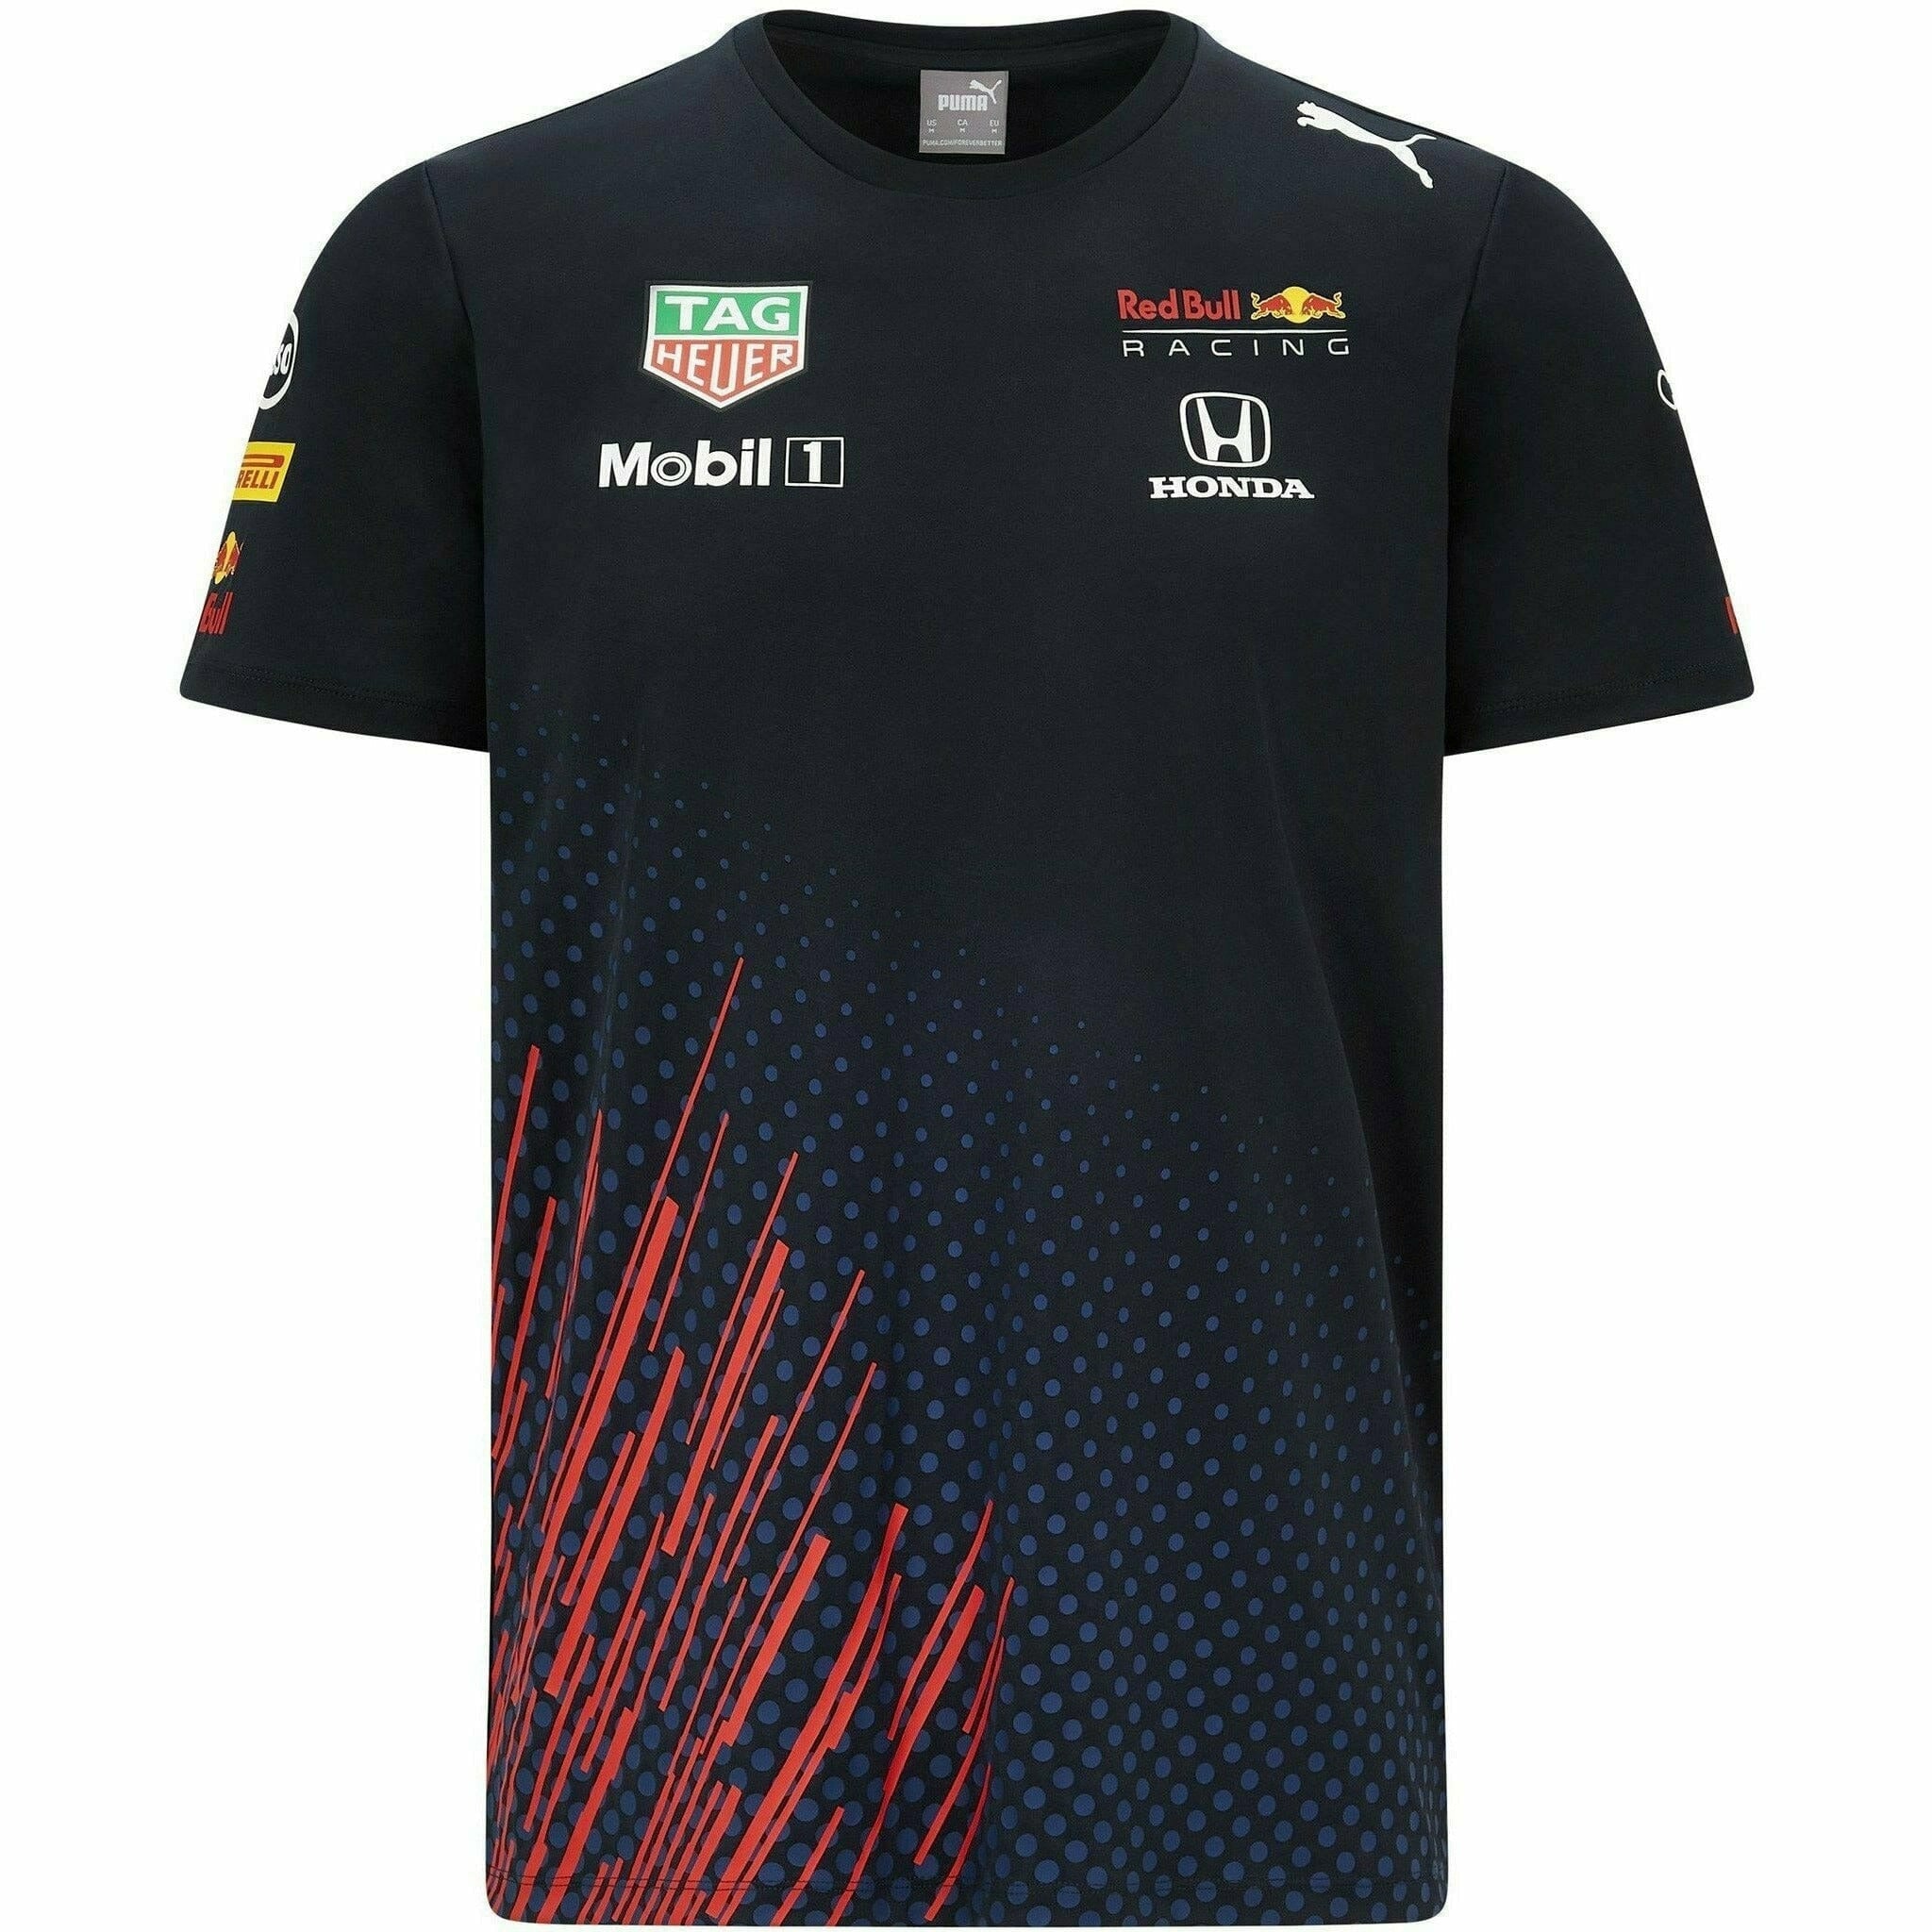 F1 Jersey : Spiw7xeyycw84m / We work directly with the f1® teams and ...